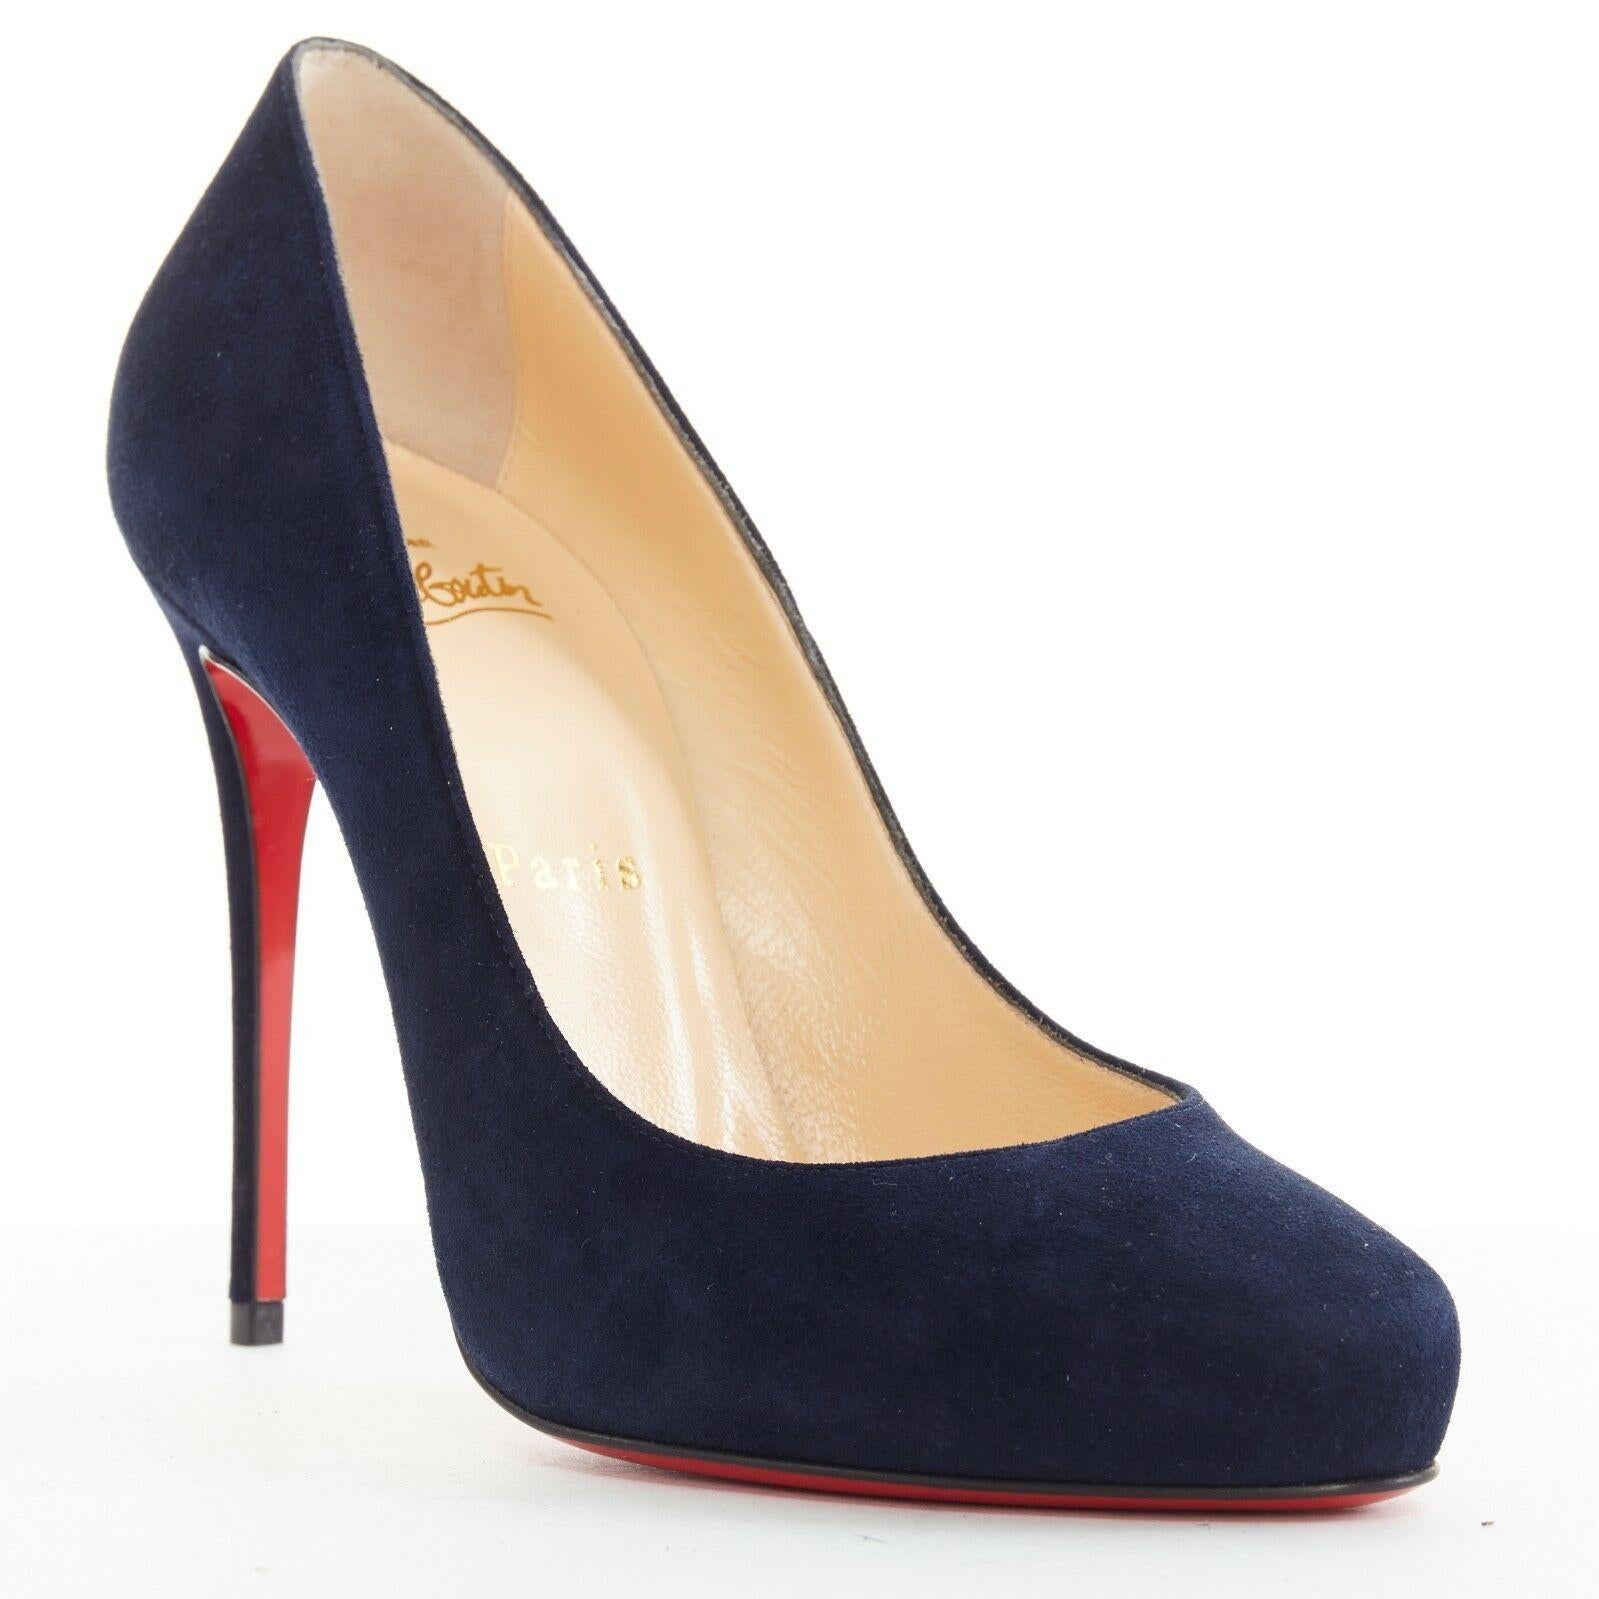 new CHRISTIAN LOUBOUTIN Fifi 100 navy blue suede almond toe stiletto pump EU37.5
CHRISTIAN LOUBOUTIN
Fifi 100. Navy blue suede upper. 
Rounded almond toe. Slim heel. 
Signature red lacquered leather sole. 
Padded insole. Tan leather lining. 
Made in